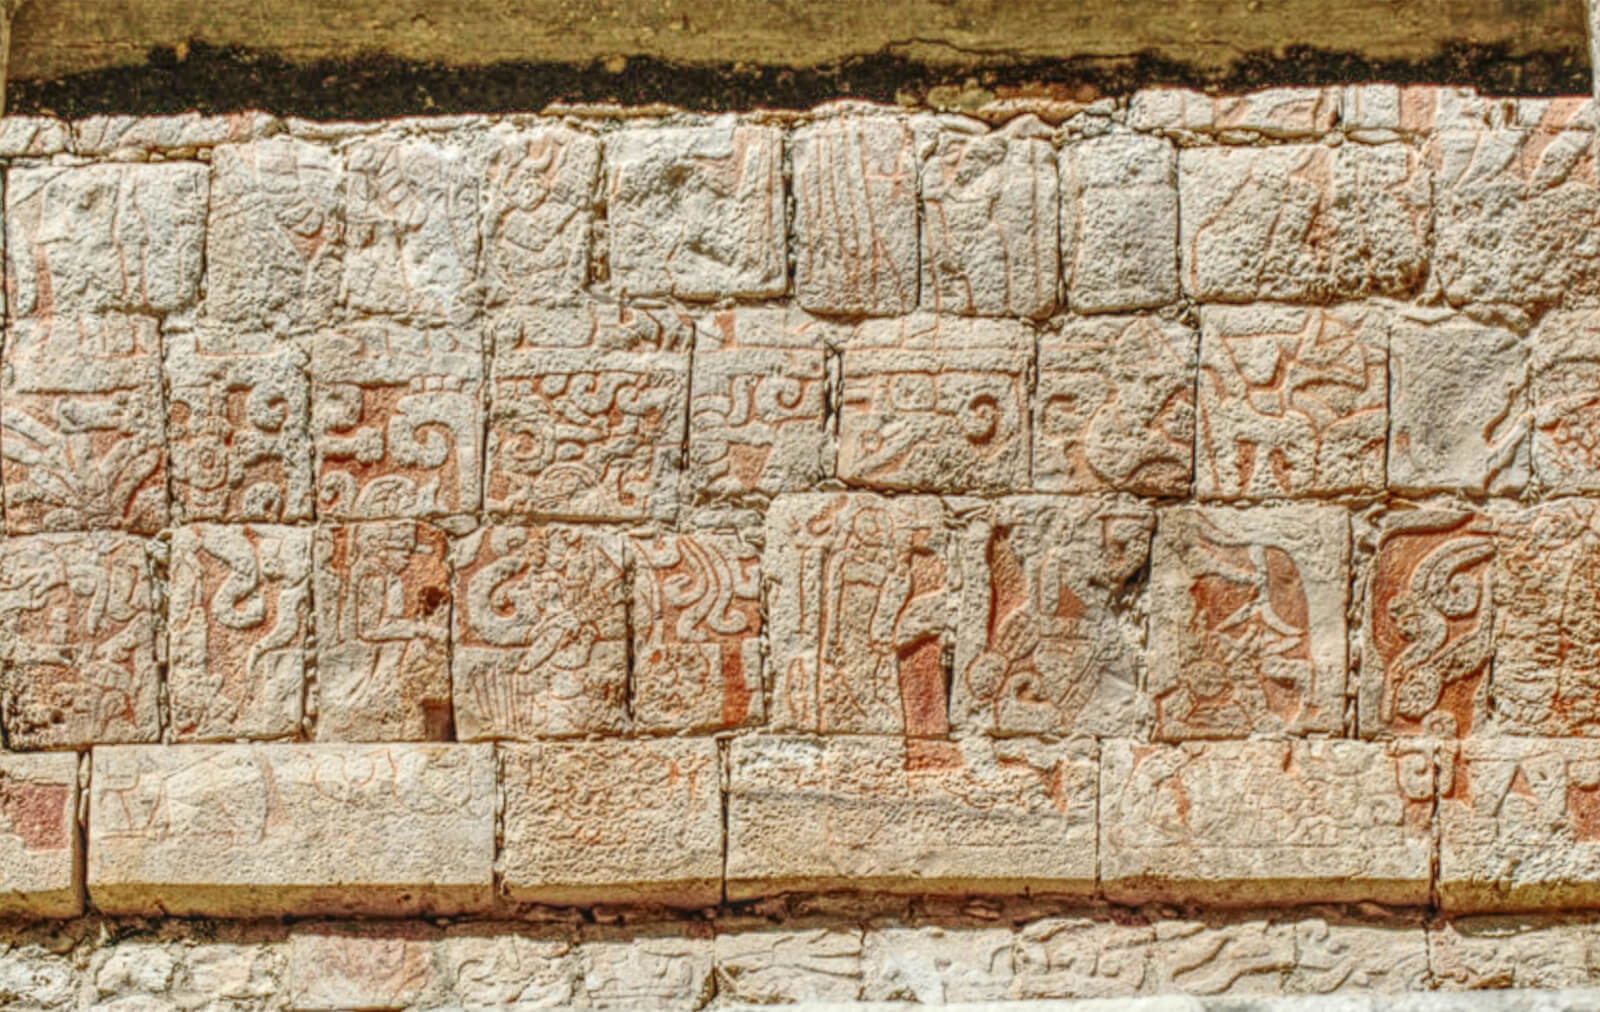 Wall of The Temple of the Bearded Man in Chichén Itzá